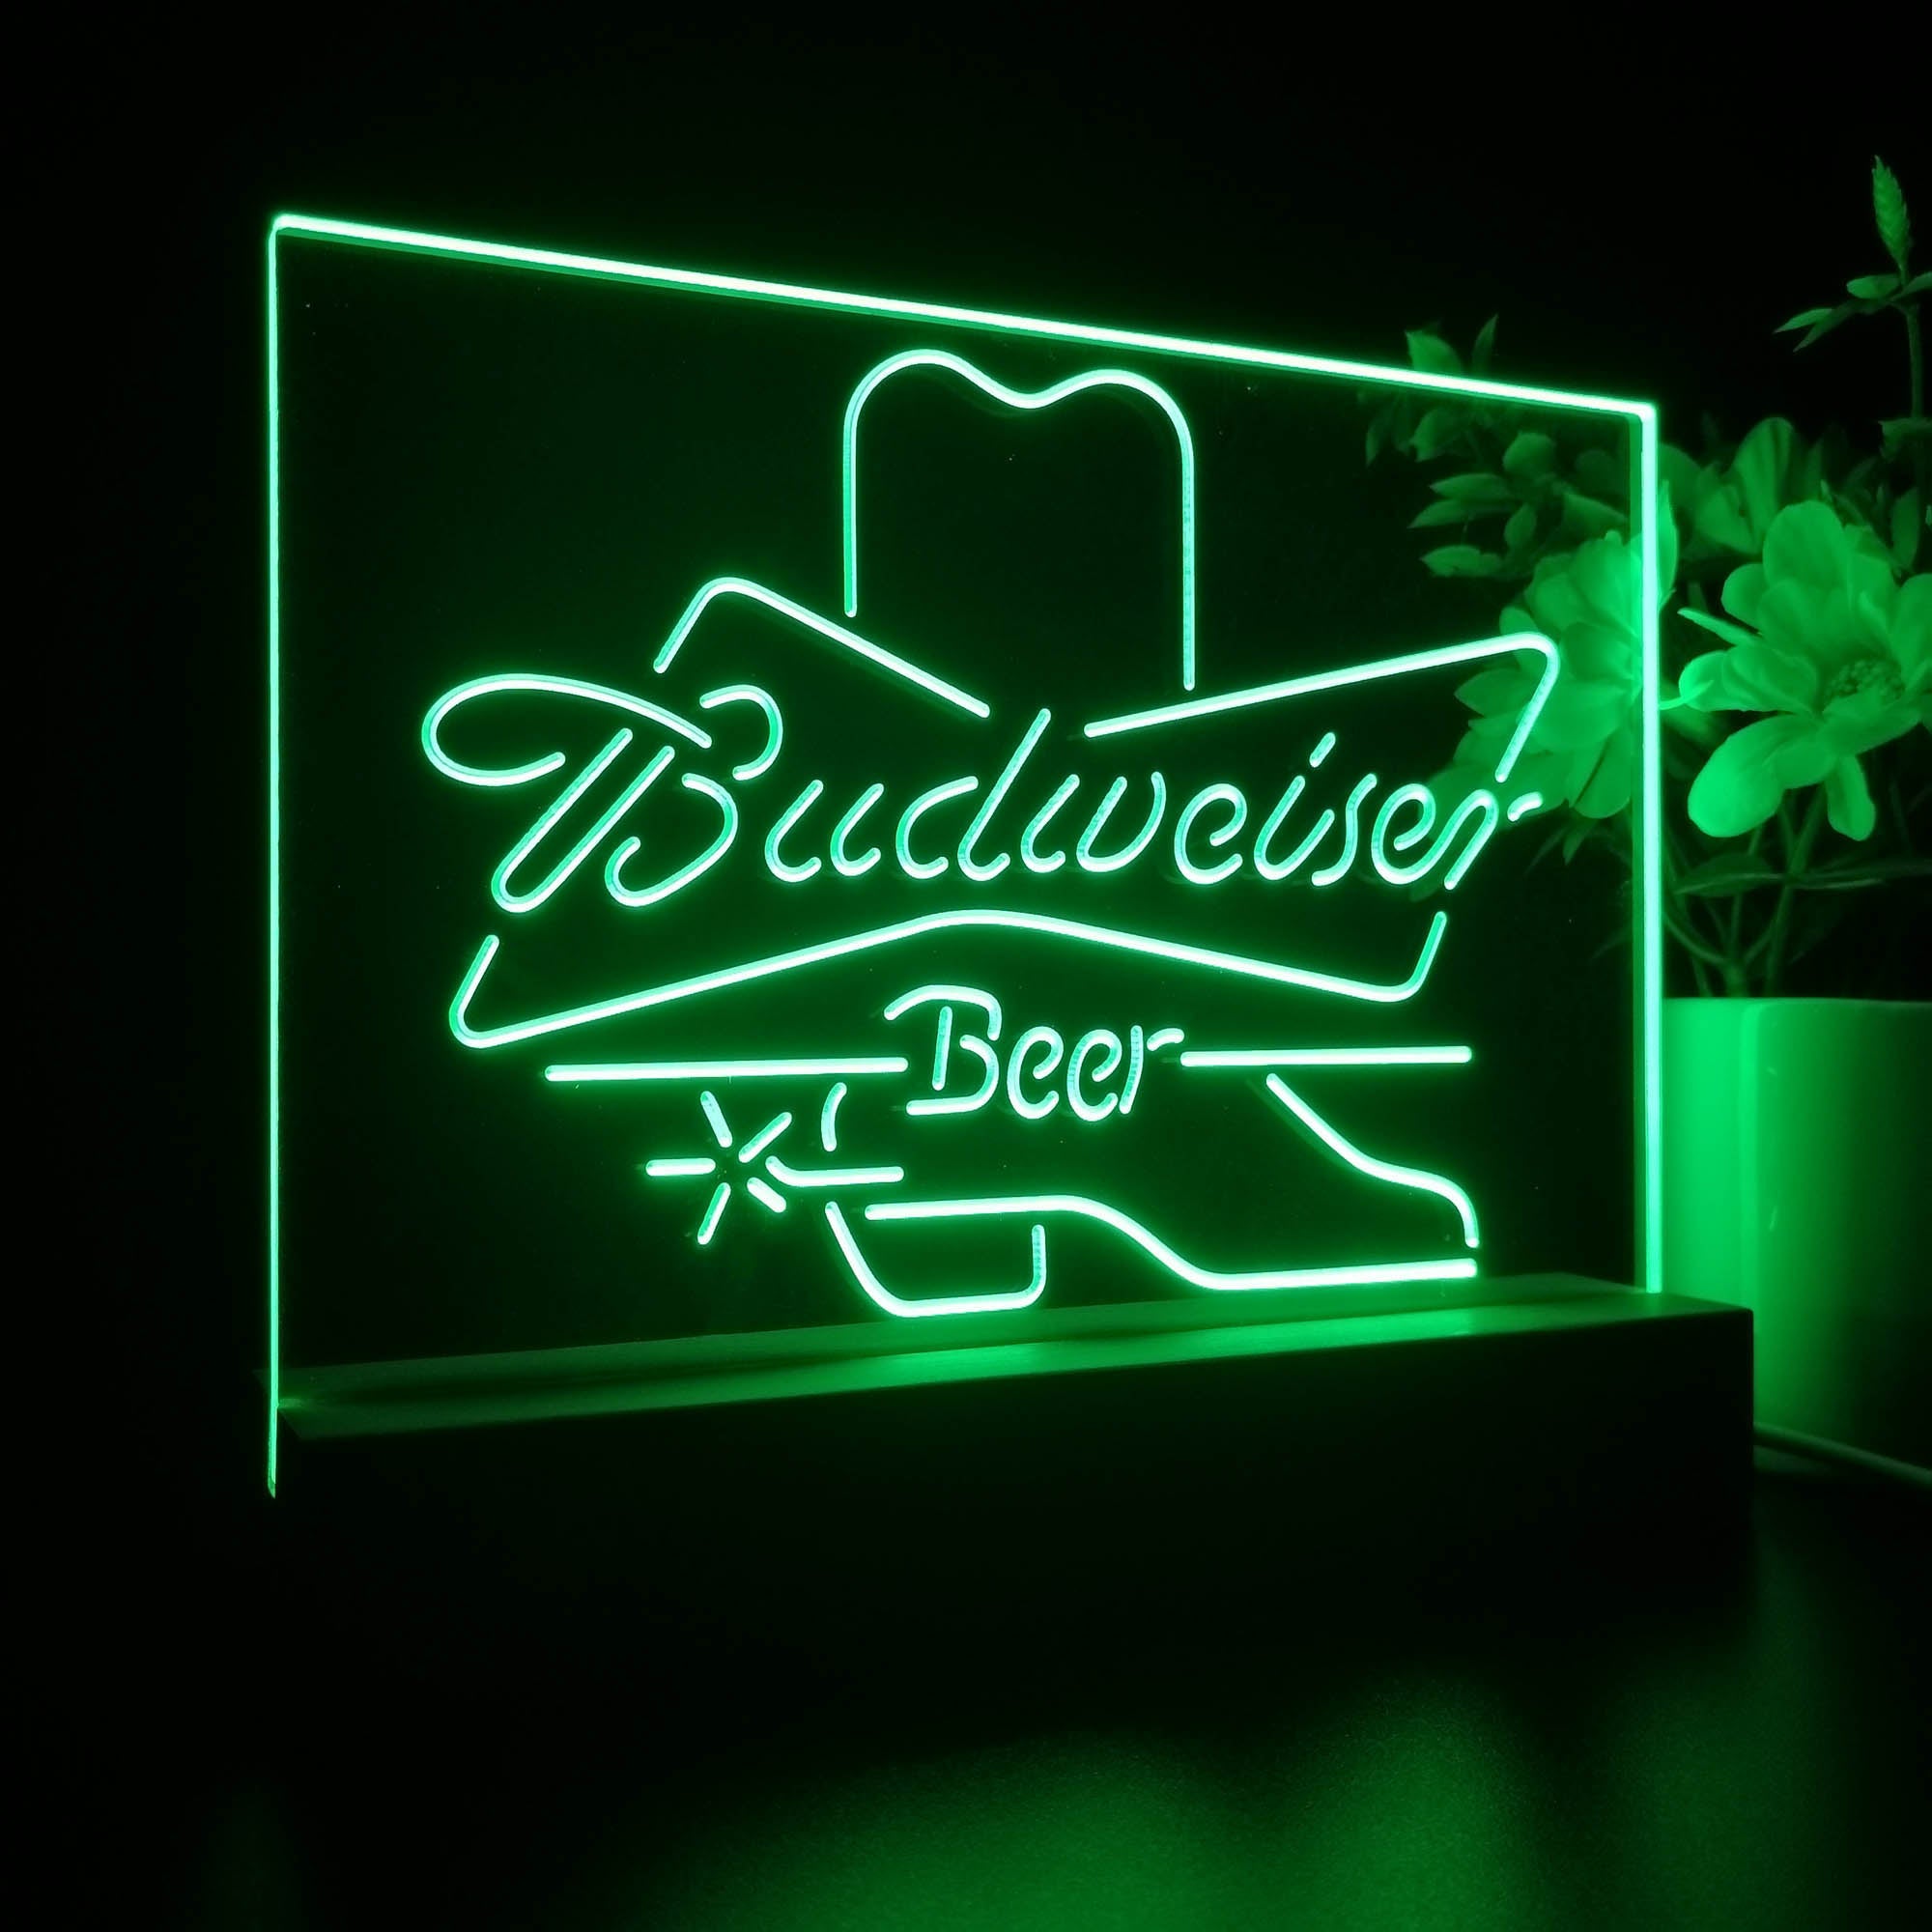 Budweisers Cowboys Boot Home Beer Bar Decoration Gifts Night Light LED Sign